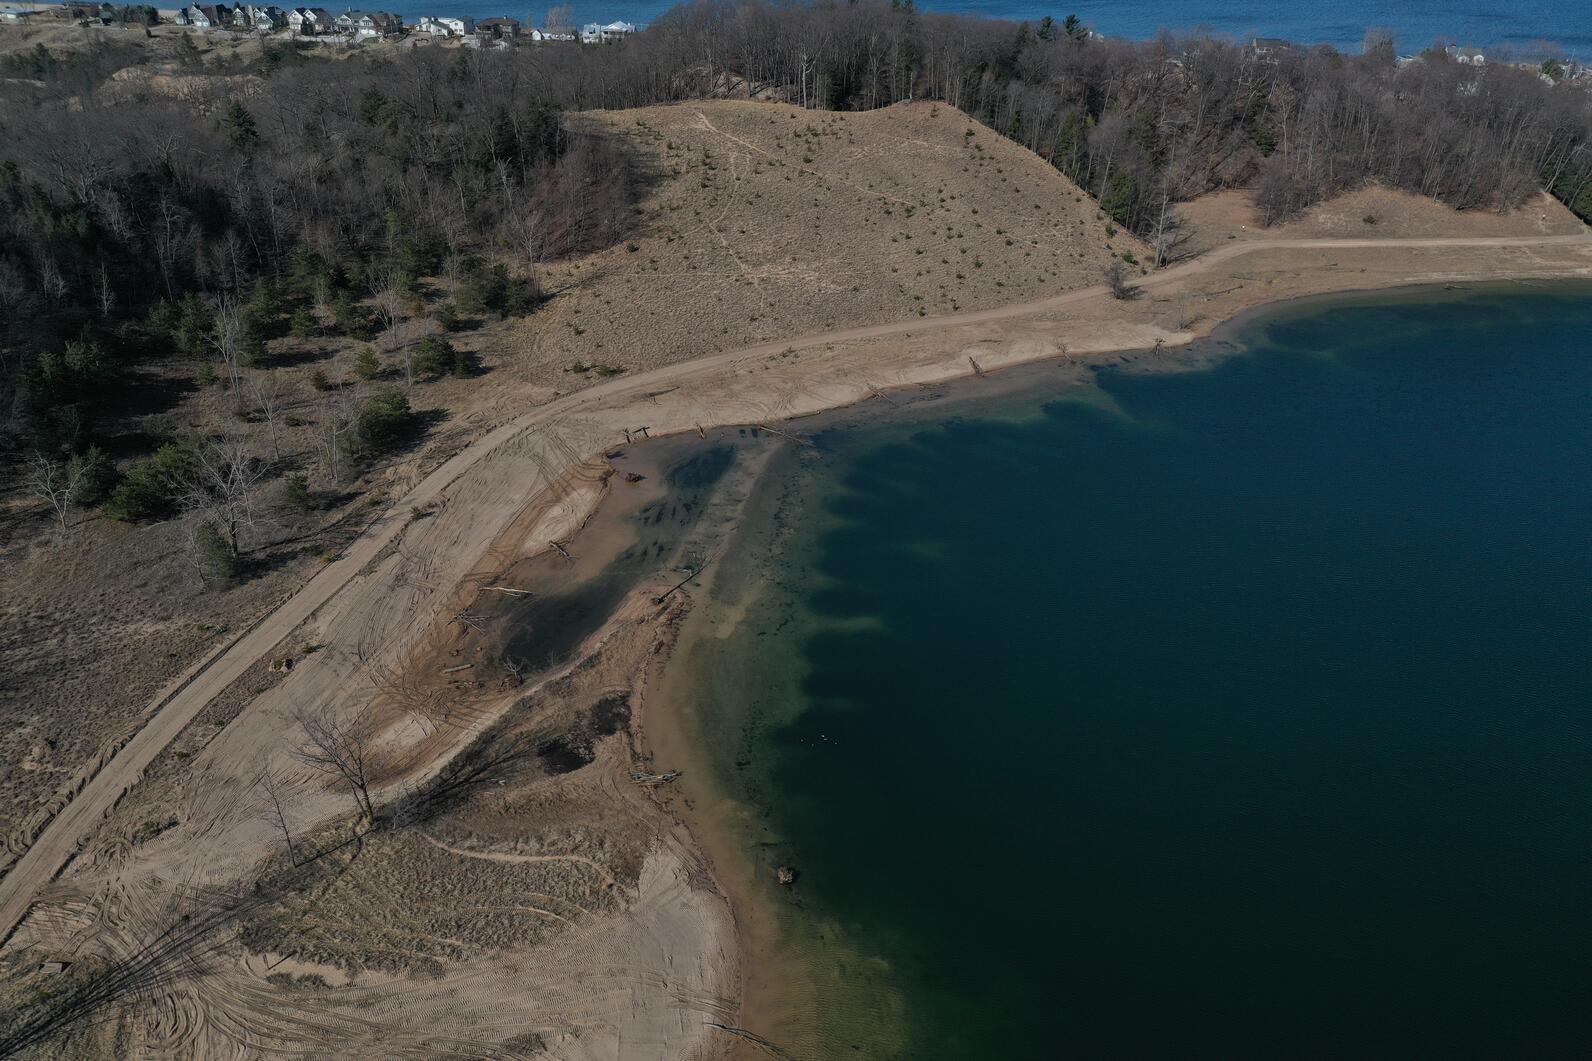 Bird’s eye view of the southwest corner of the old mine lake (AKA Ottawa Sands Lake), an 80-acre lake, created by sand mining operations. The shoreline grading and littoral zone creation is visible through the clear water and includes the creation of the 